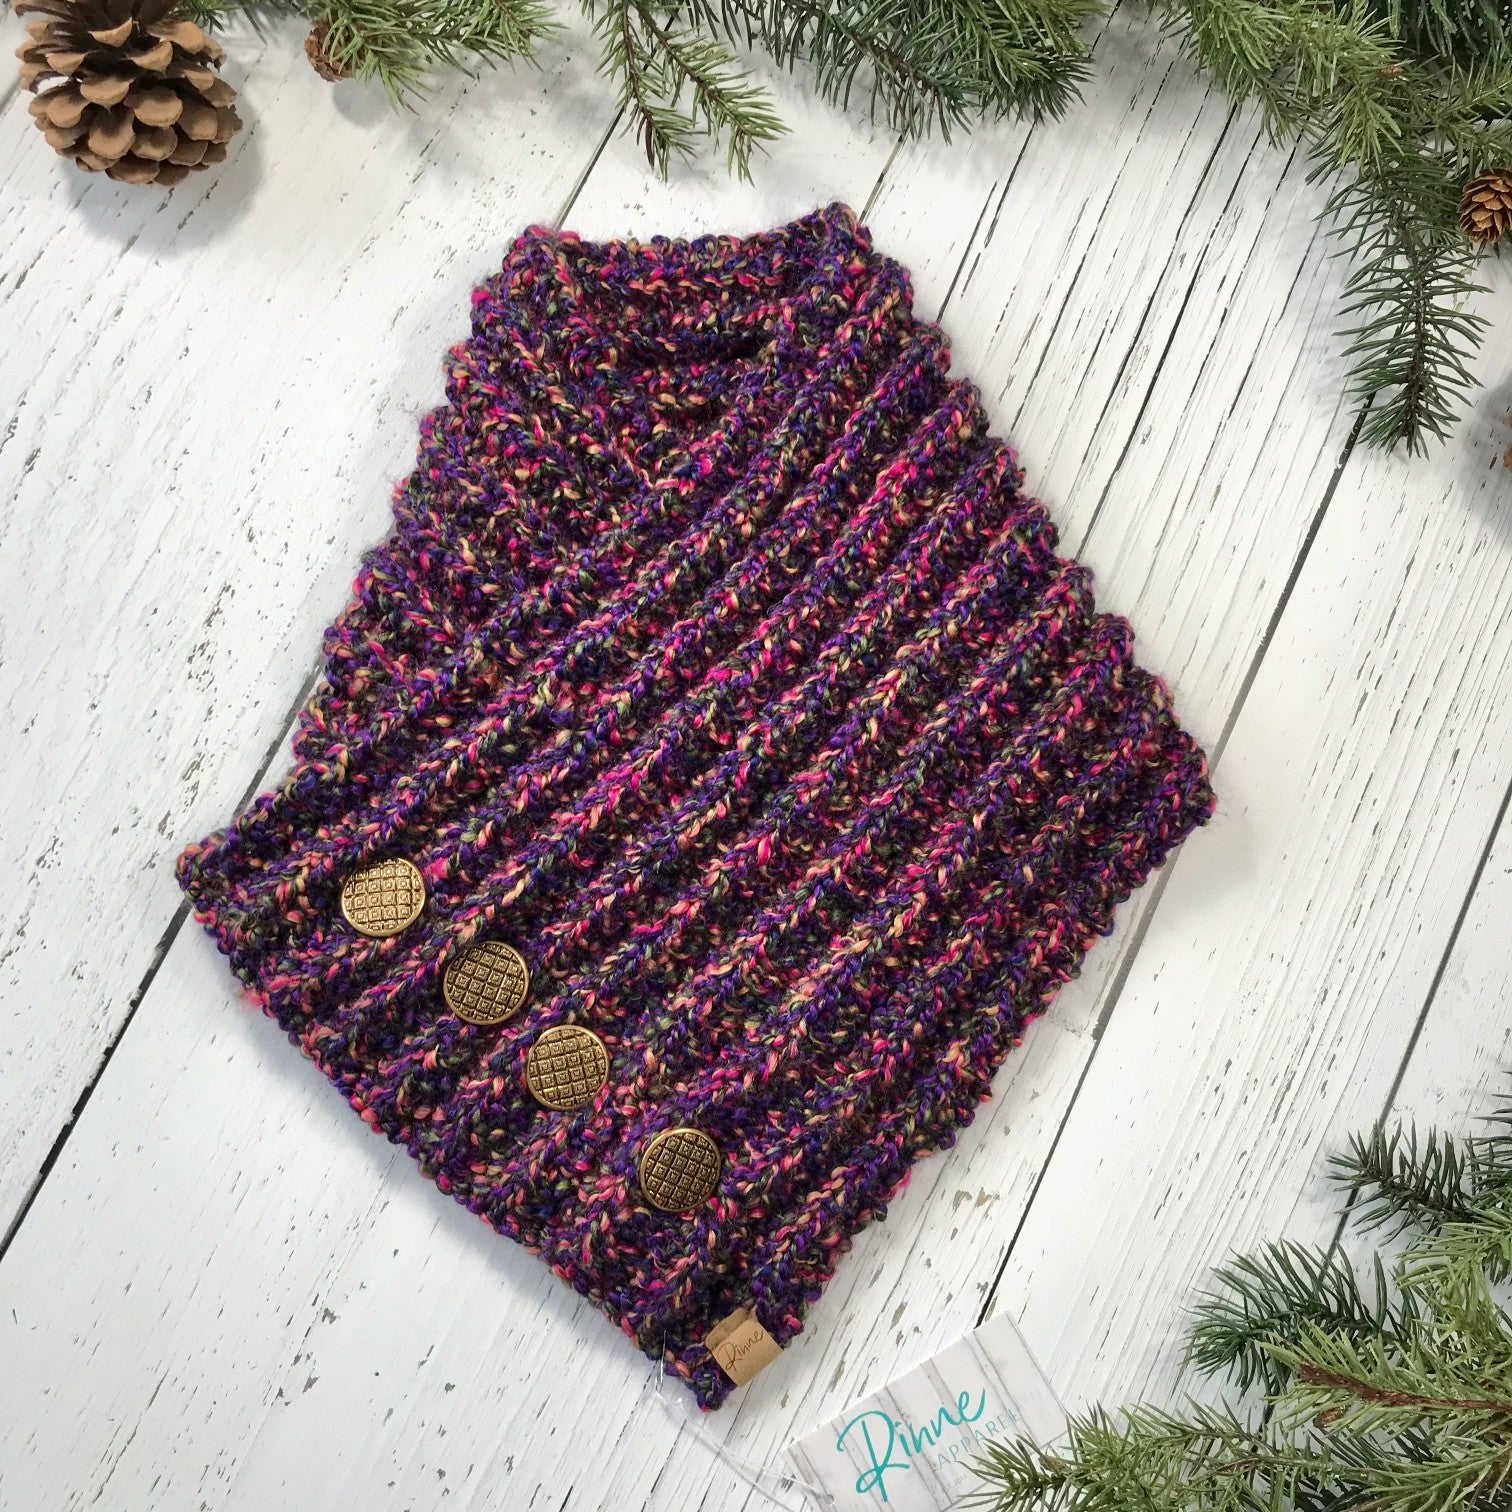 Classic Knit Button Cowl in pink, purple, olive green, and yellow with vintage gold buttons